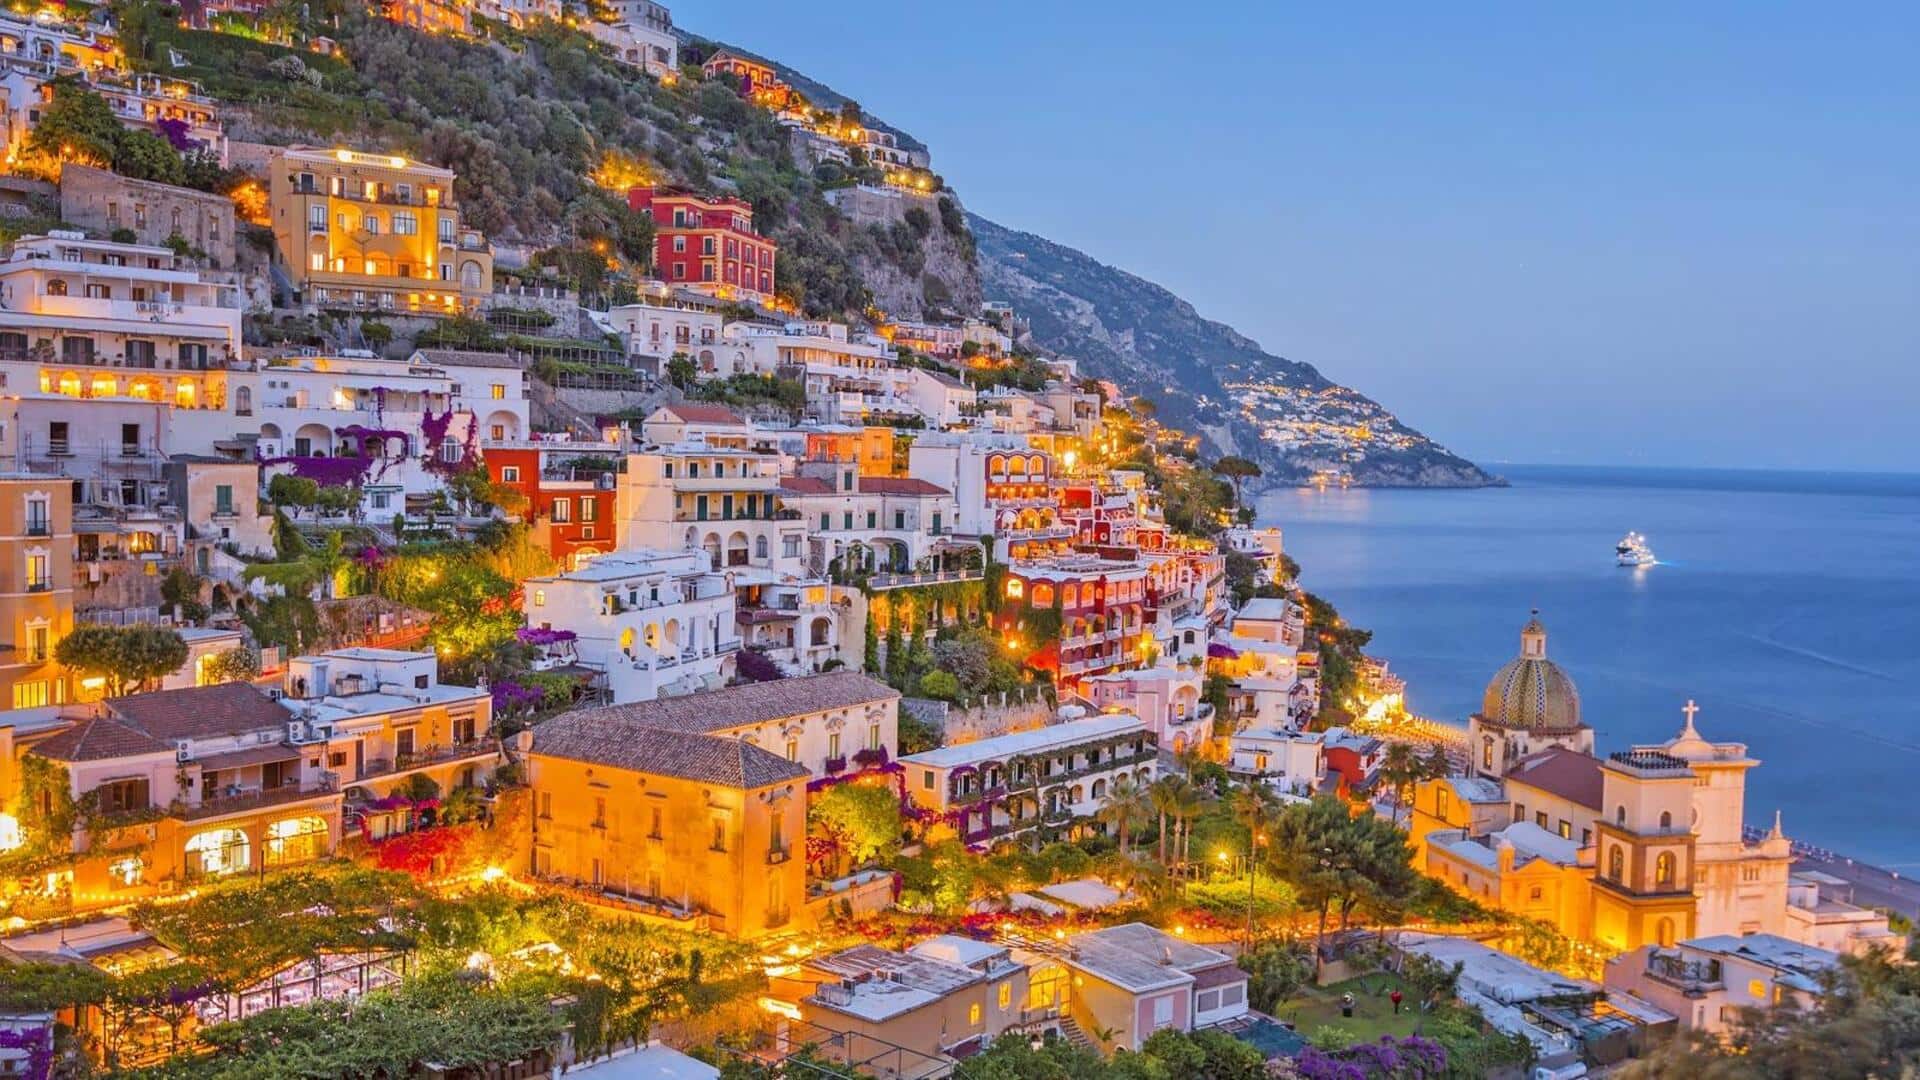 The romantic Amalfi Coast, Italy: A things-to-do guide for couples 